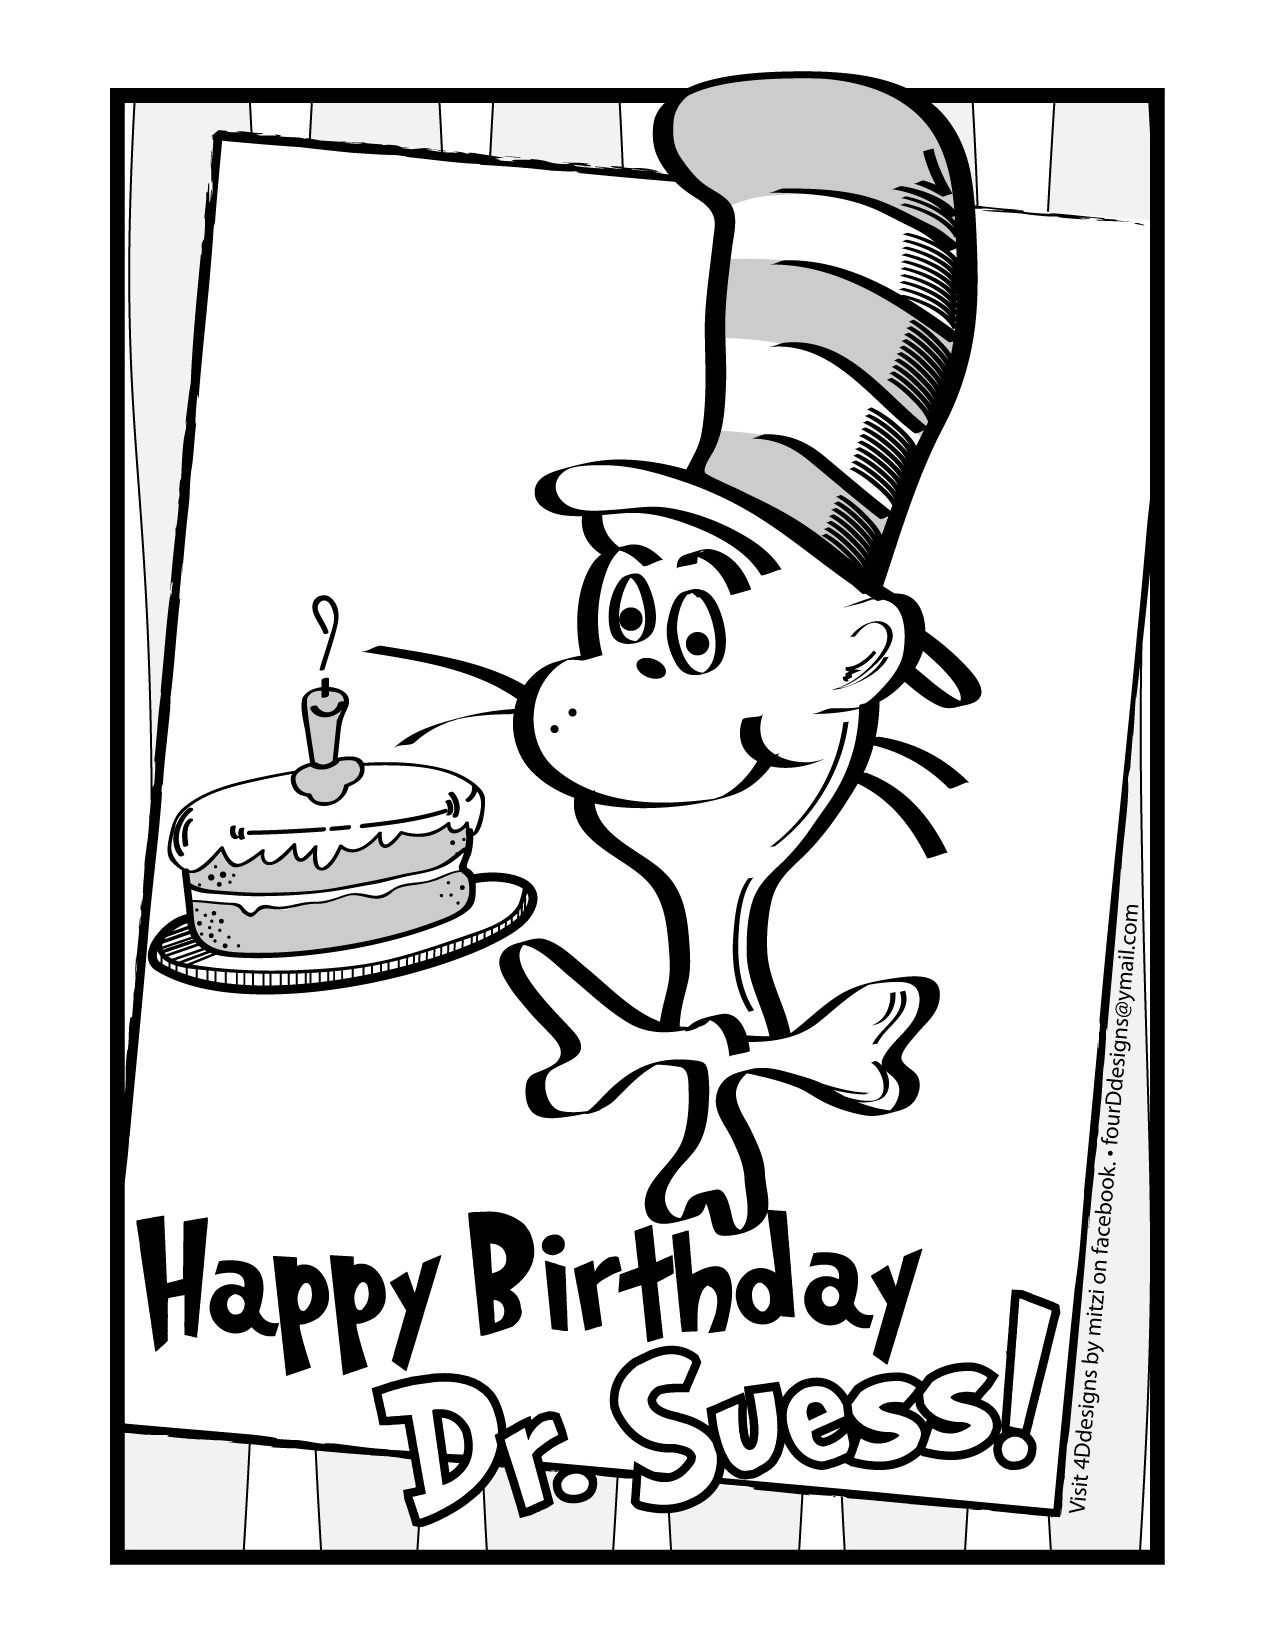 Happy Birthday Dr Seuss Coloring Page